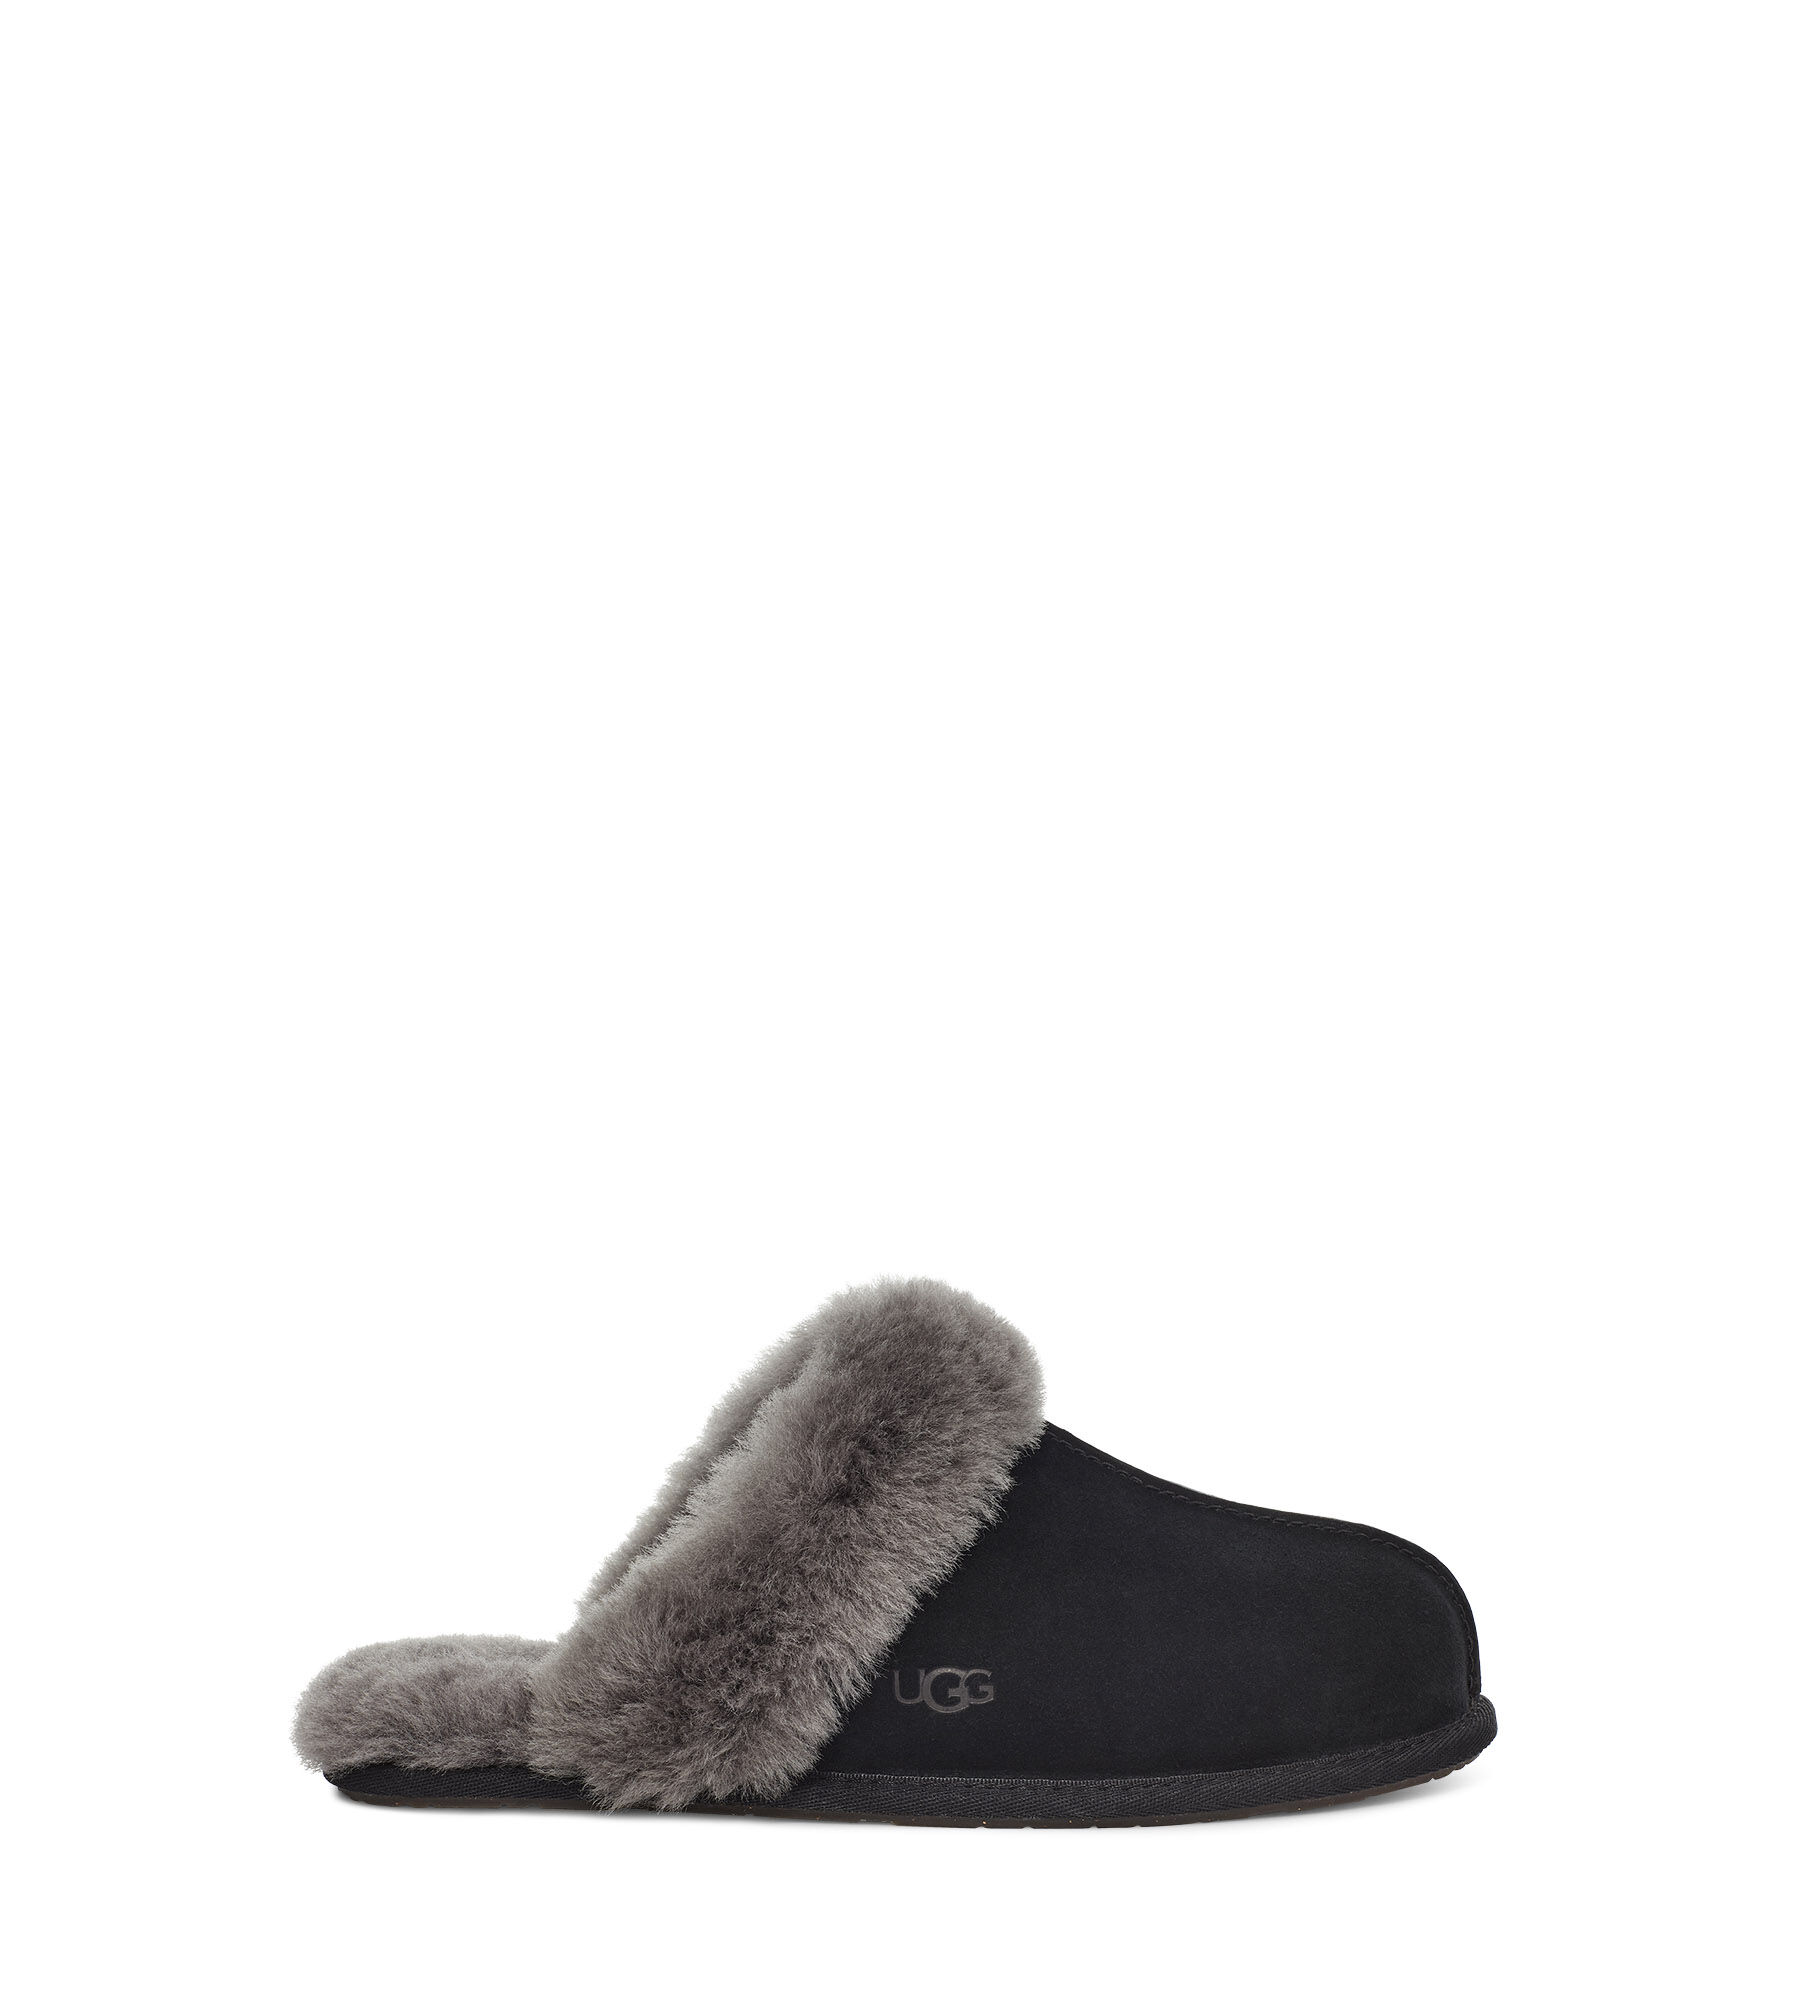 ugg slippers black and grey